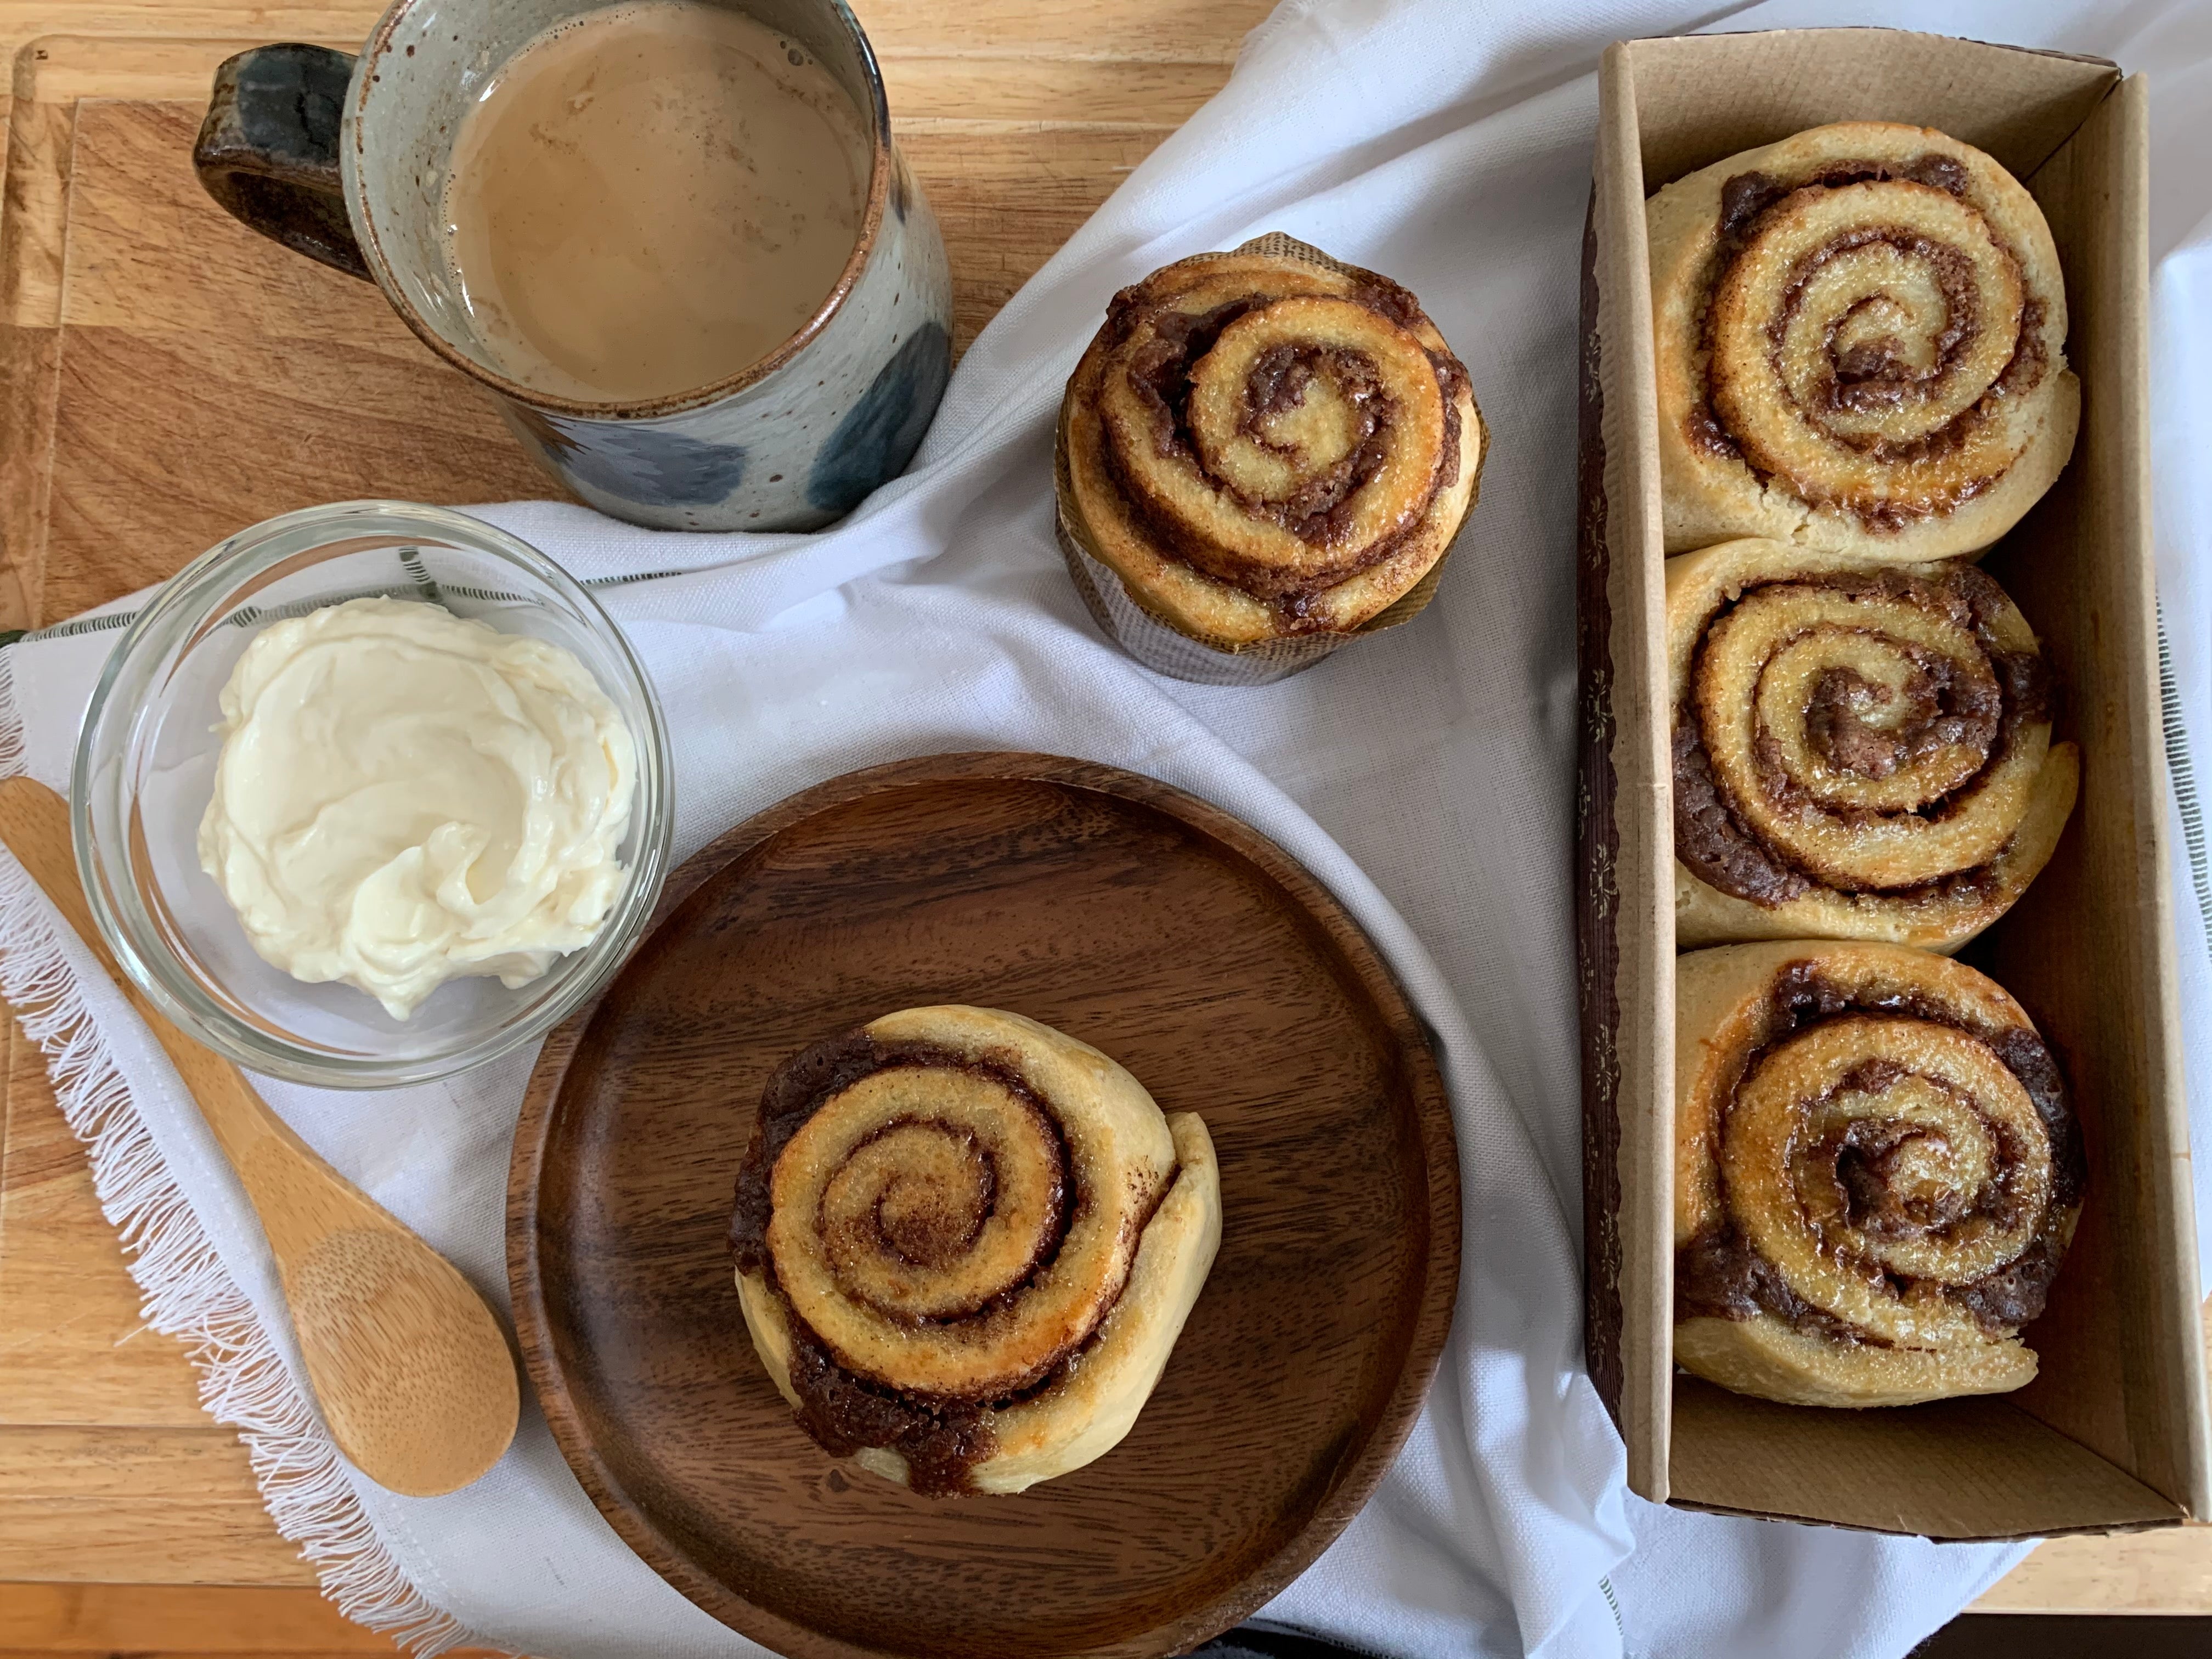 Cinnamon Rolls (3 pack with frosting on the side)